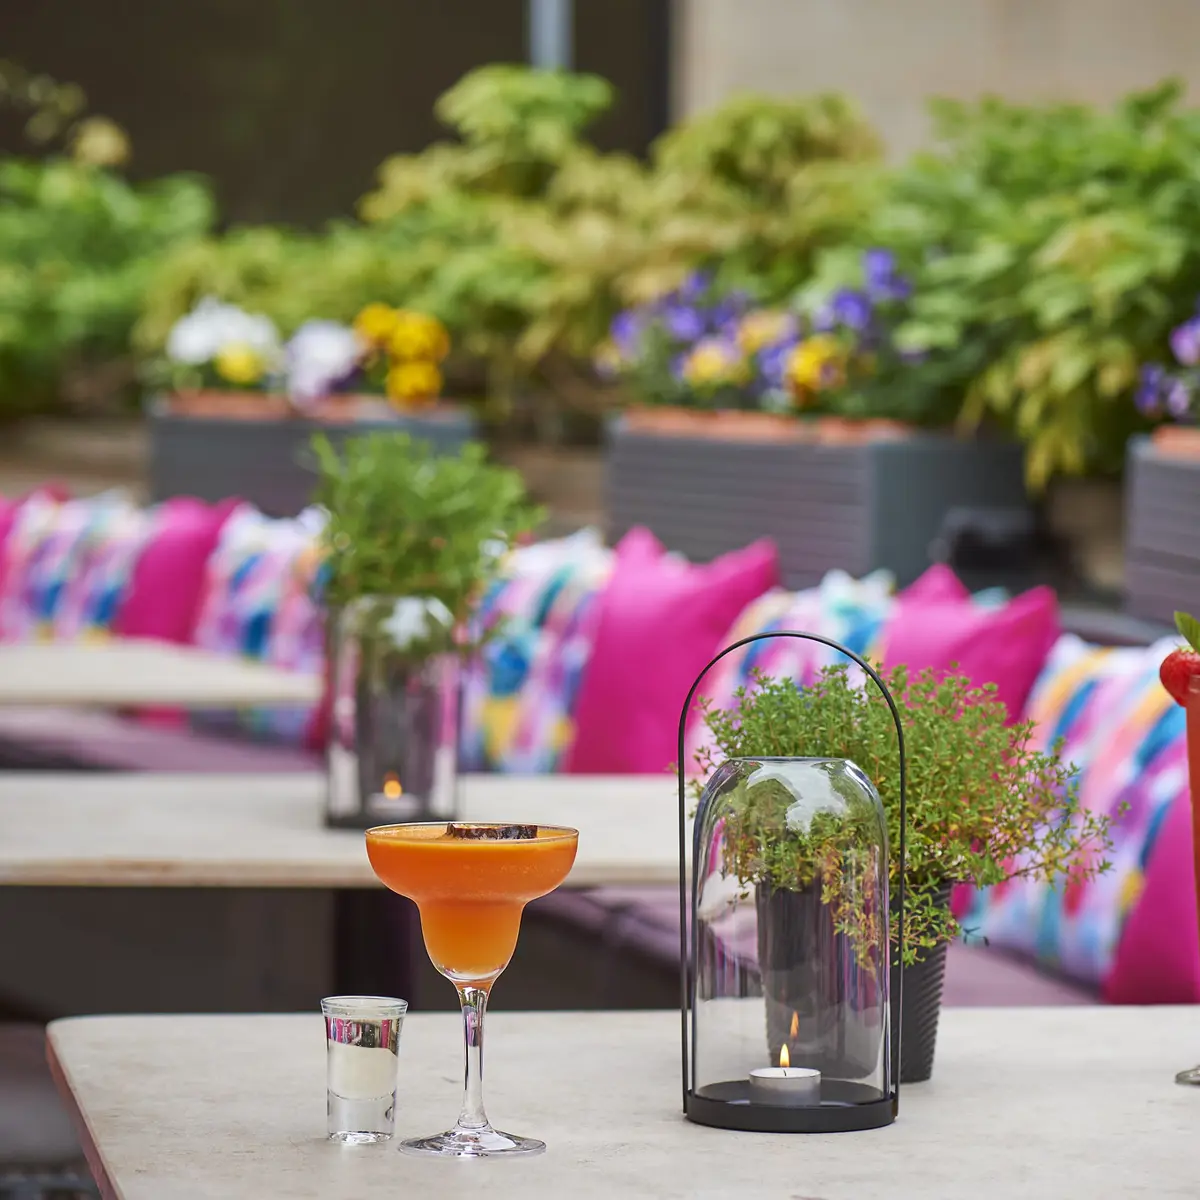 A vibrant outdoor seating area with 2 cocktails on a table